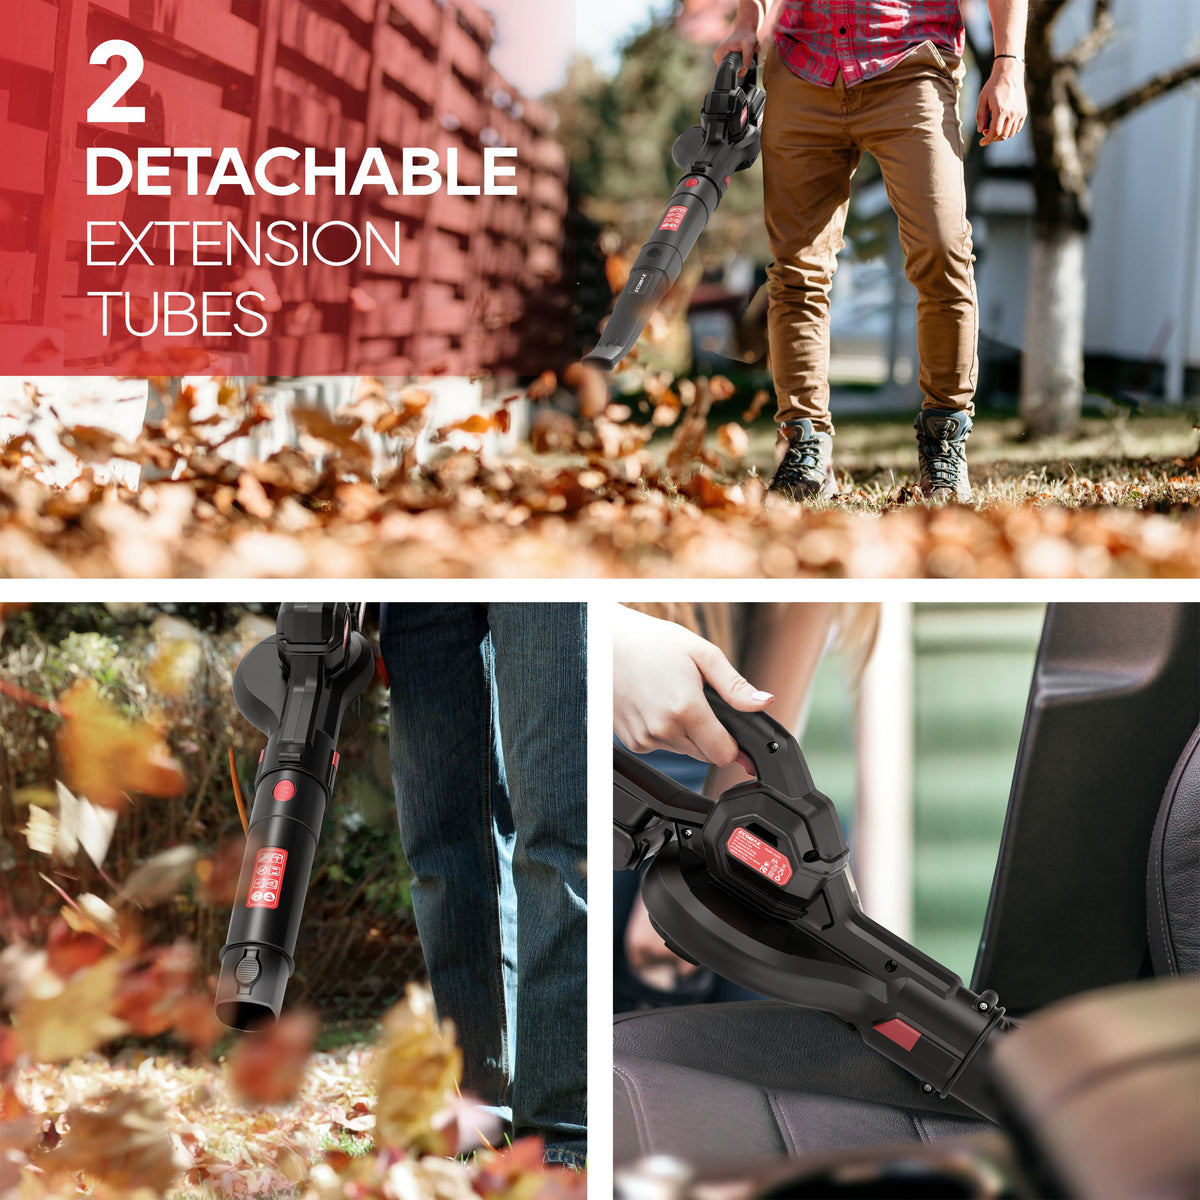 Ecomax Cordless Hand-Held Leaf Blower